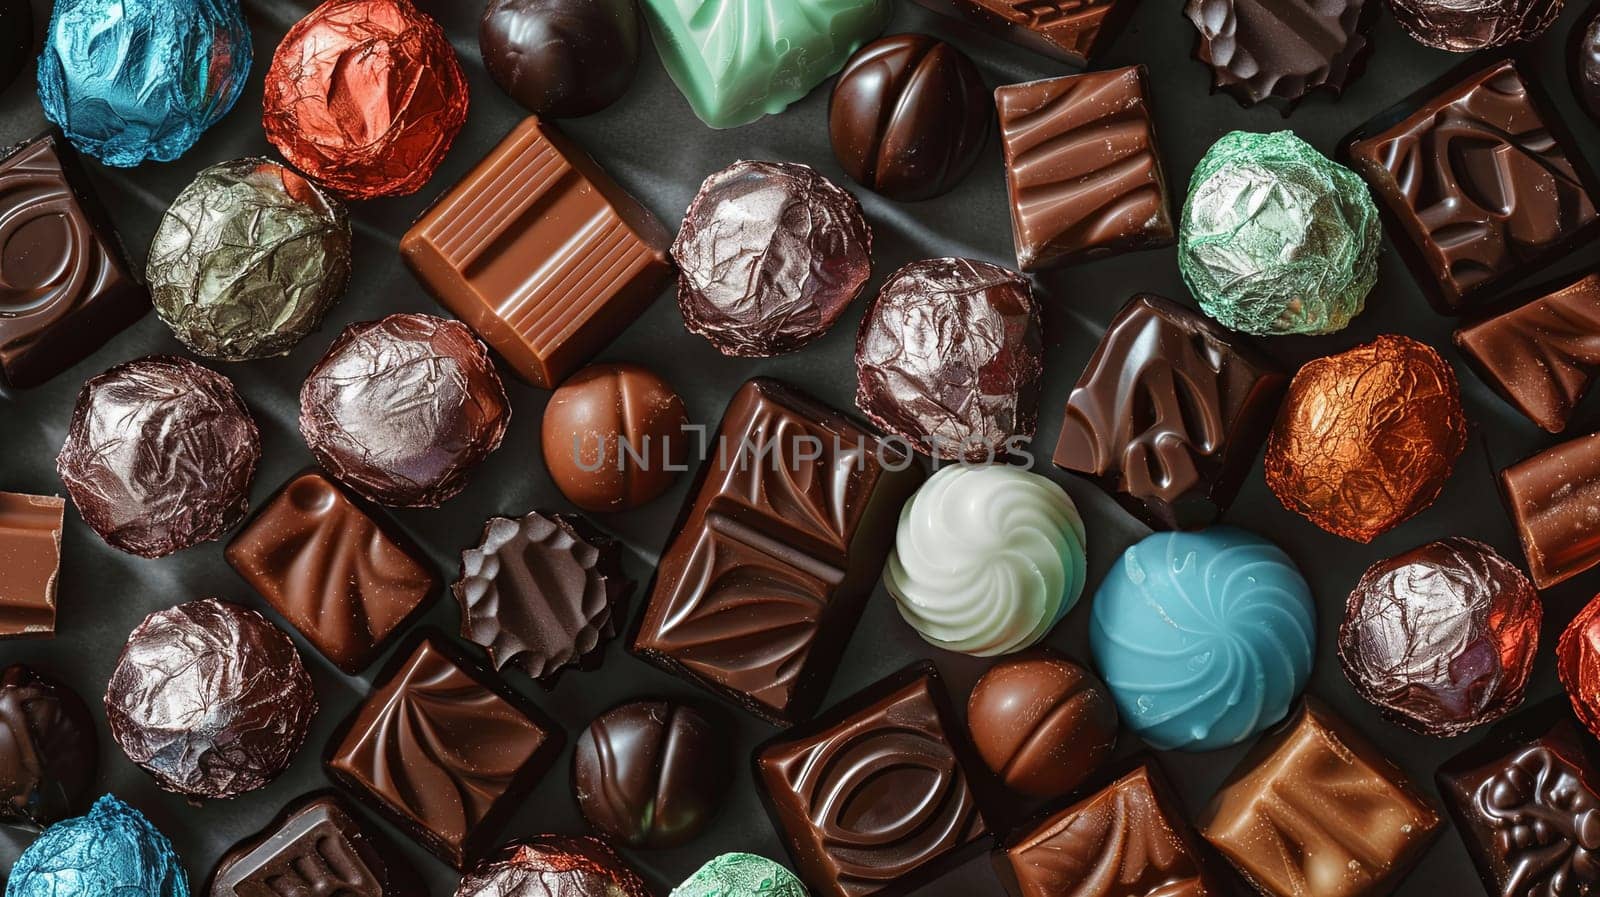 Assorted chocolates in vibrant colors and shiny wrappers spread out on a table.